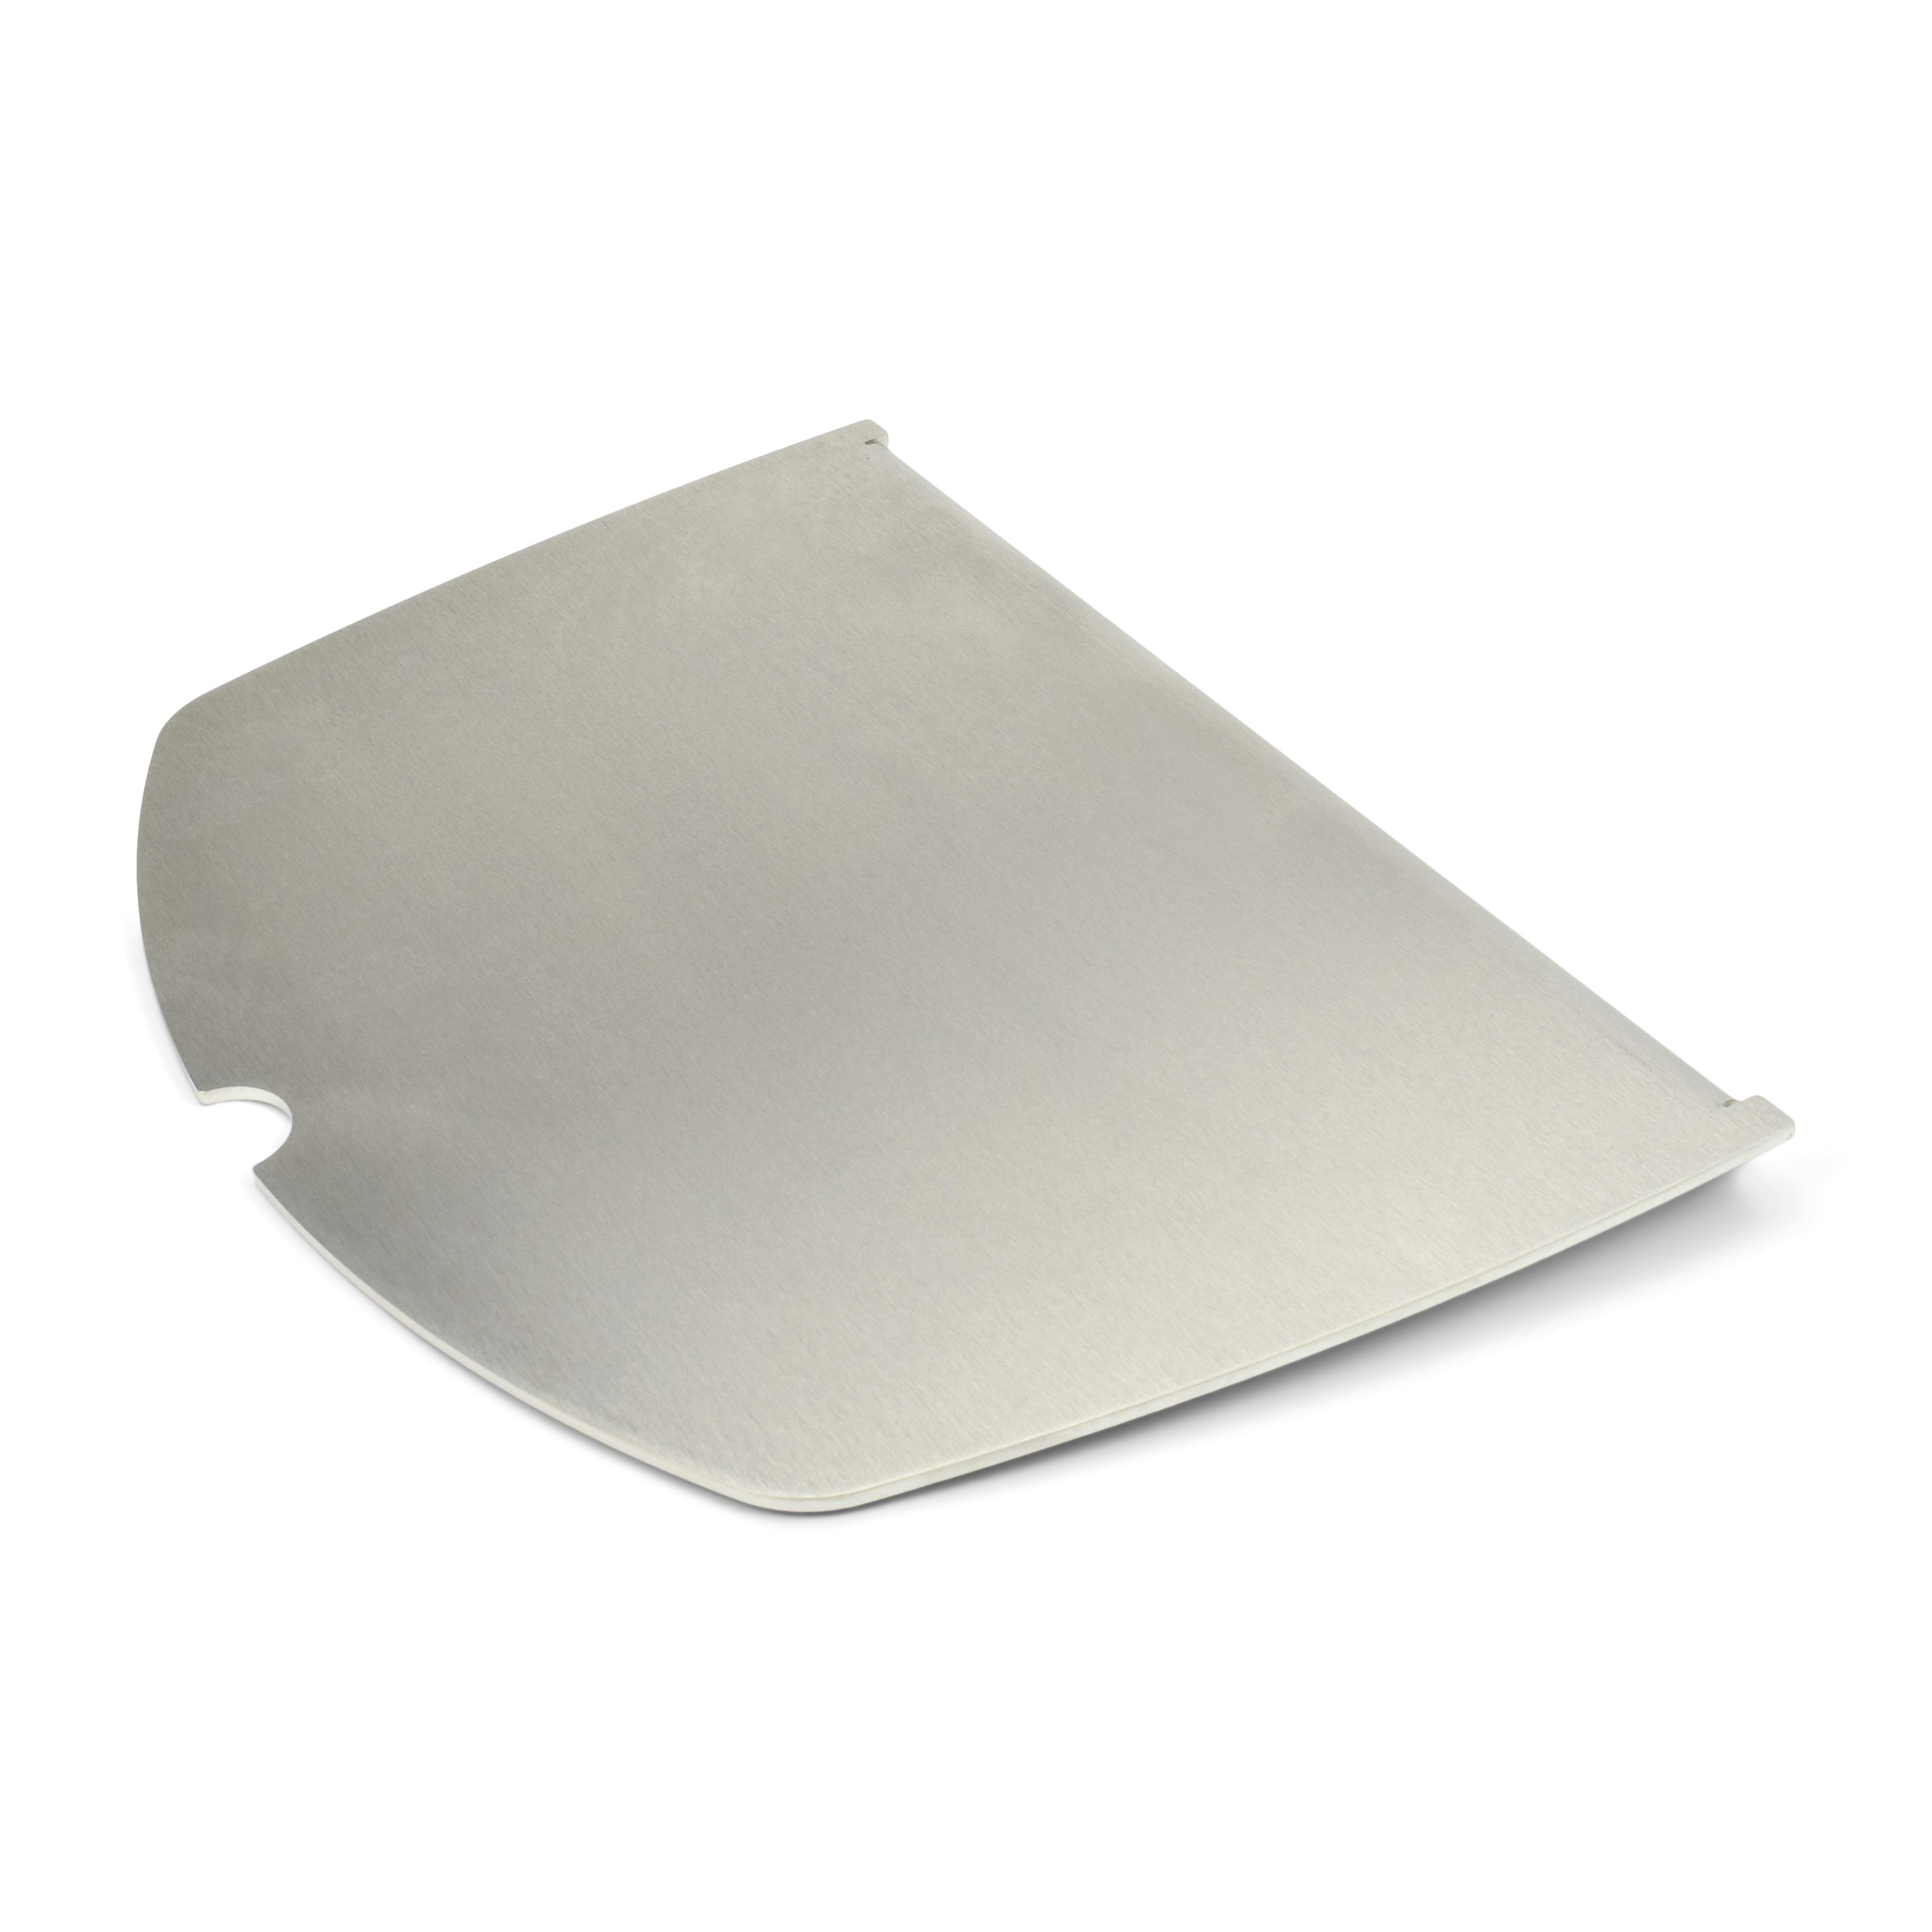 Stainless Steel Plancha for Weber Grill plate Q200 and Q2000 models